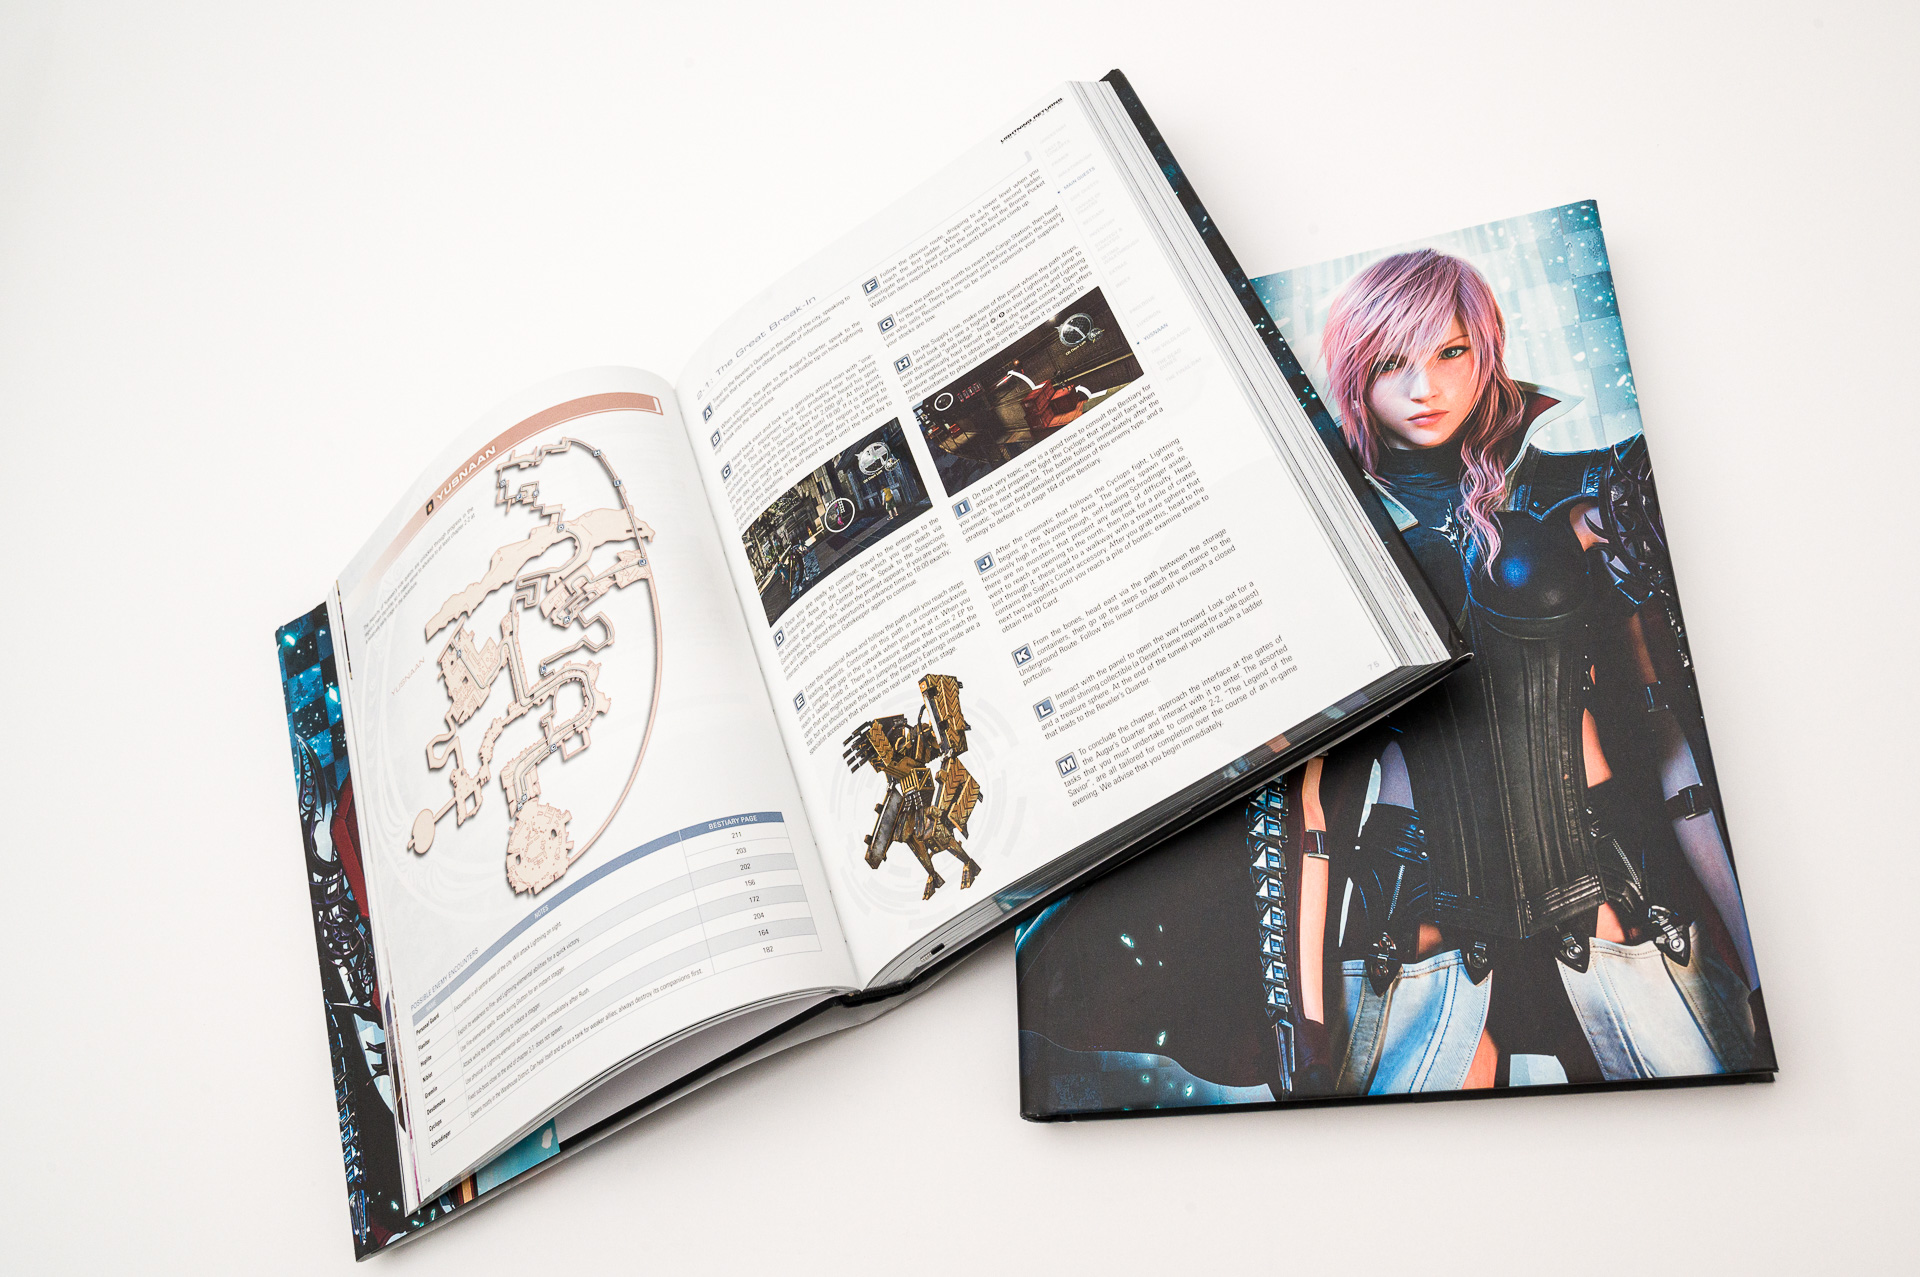 Lightning Returns: Final Fantasy XIII - The Complete Official Guide -  